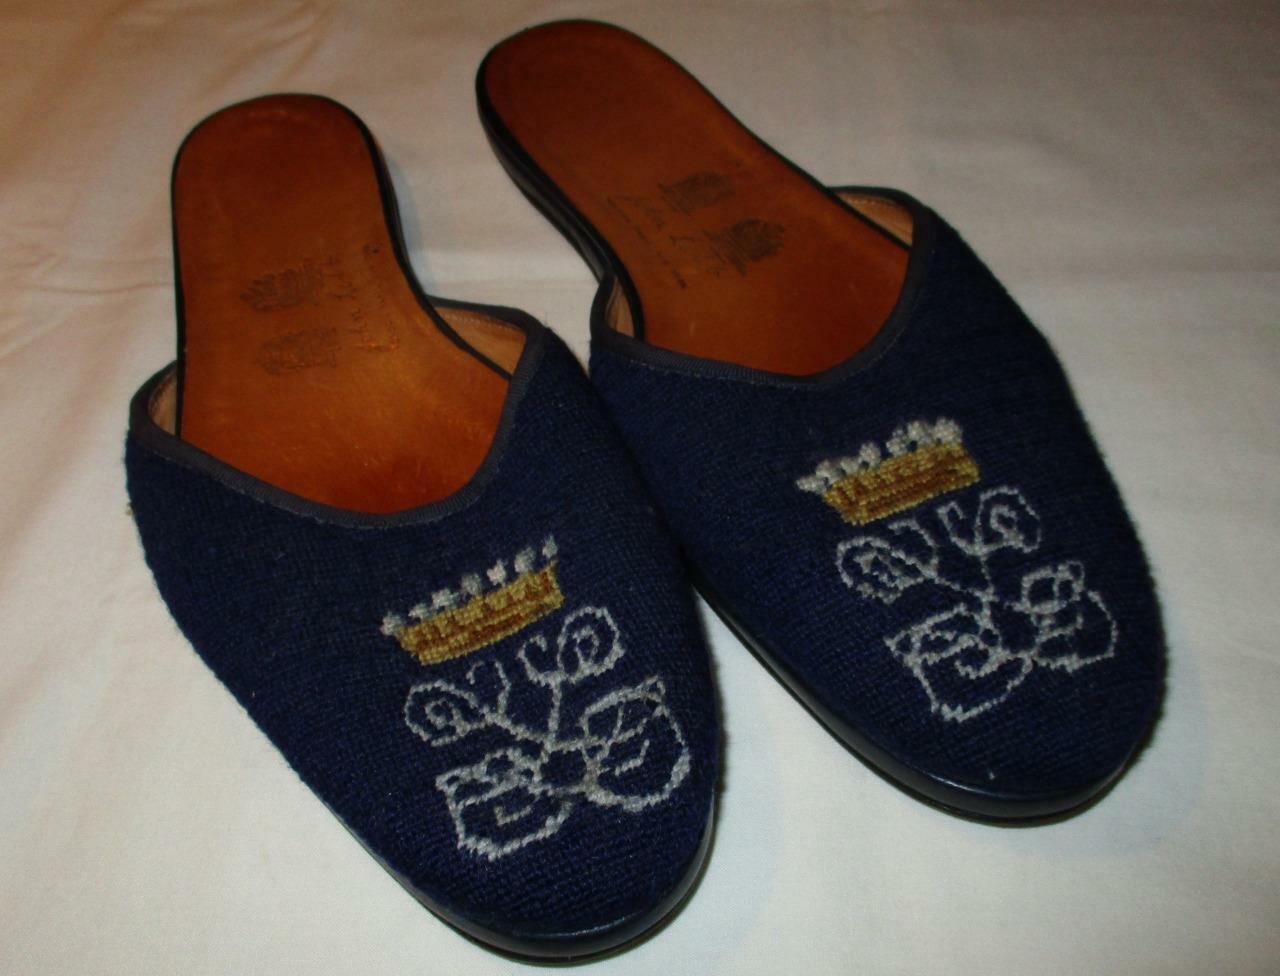 PAIR JOHN LOBB TRAVEL SLIPPERS WITH ARMORIAL EMBROIDERY - DUKE OF WINDSOR